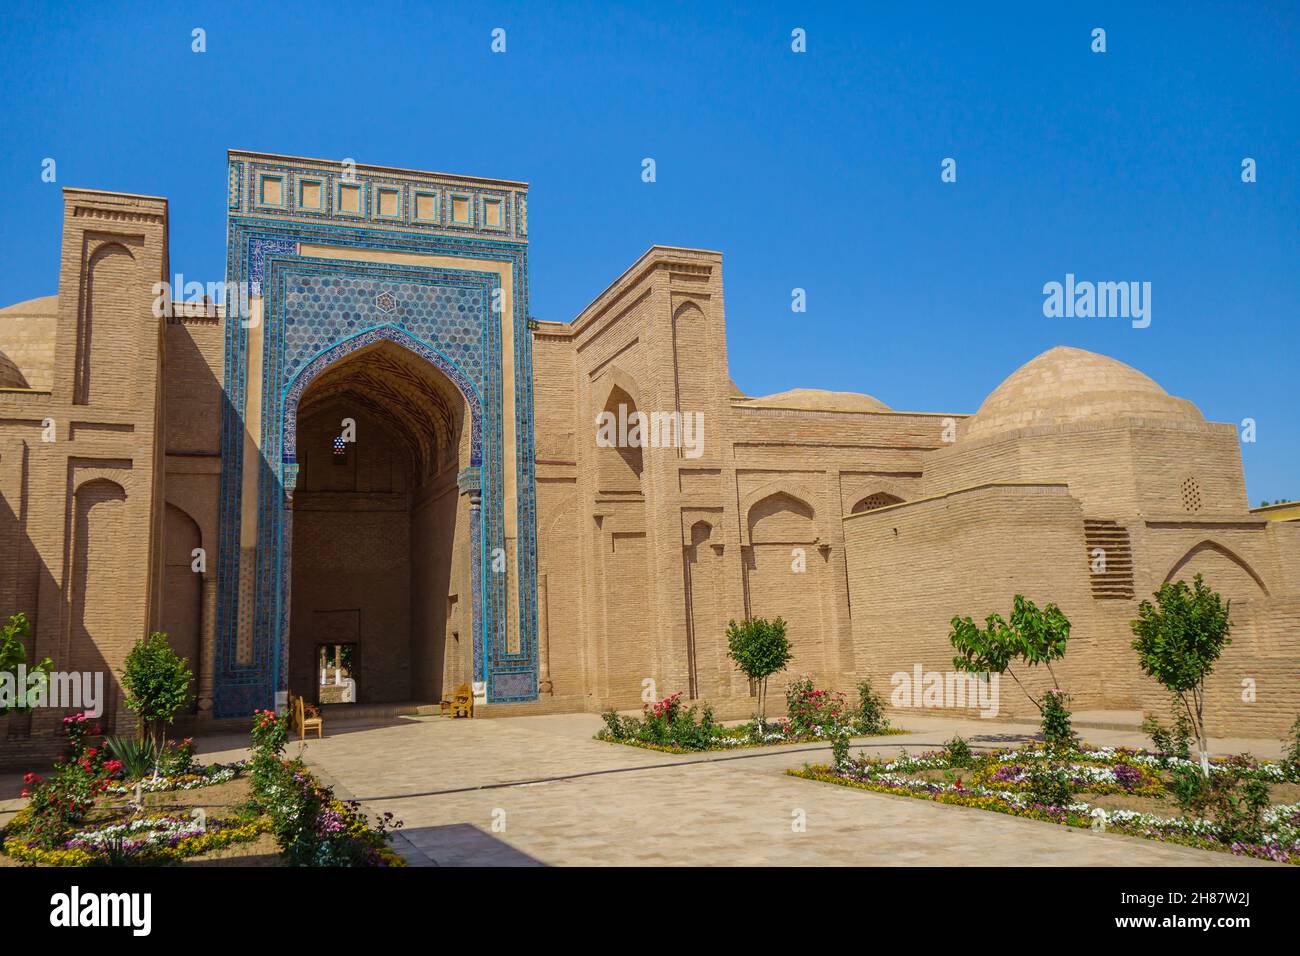 Sultan Saodat, a historical architectural complex from the medieval mausoleums of the 10-17 centuries. Iwan with patterns is the main entrance. Shot i Stock Photo